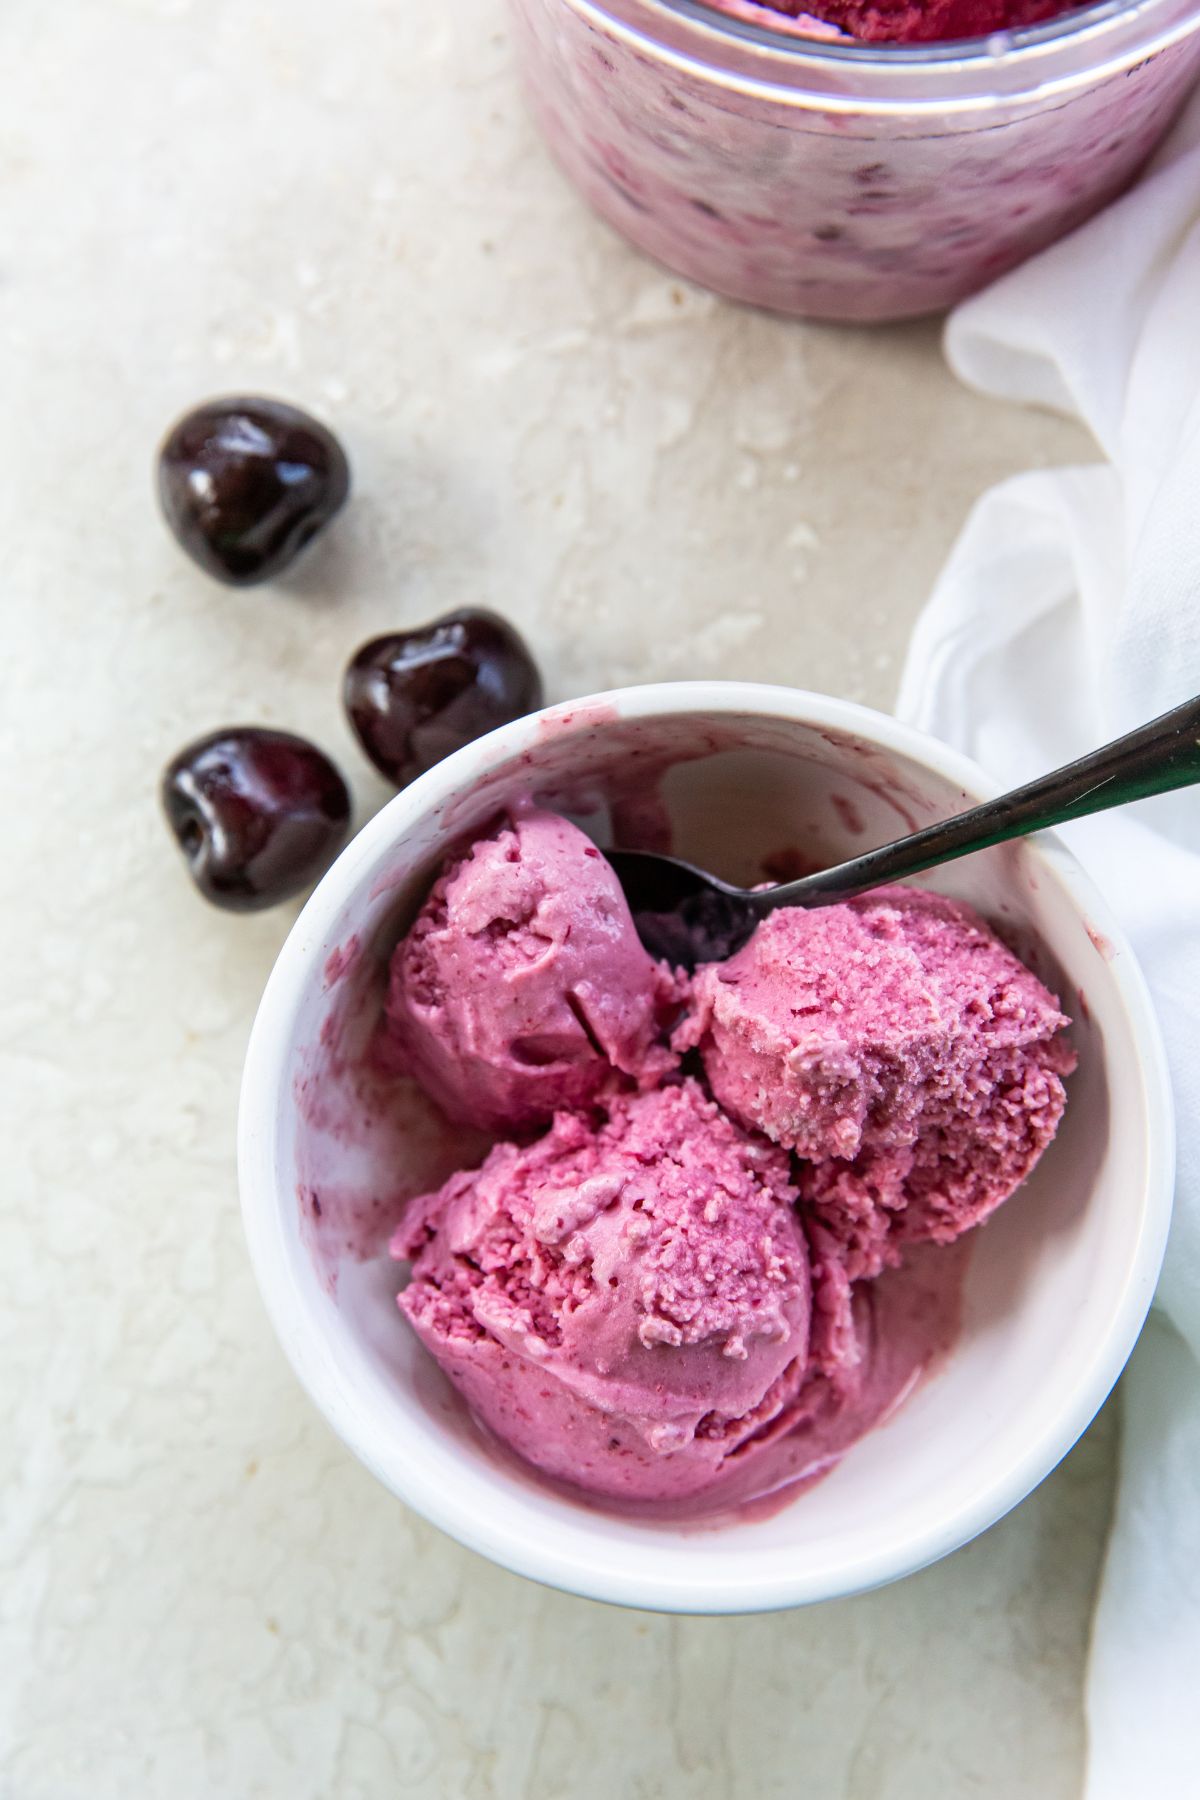 Cherry ice cream in a bowl with cherries.